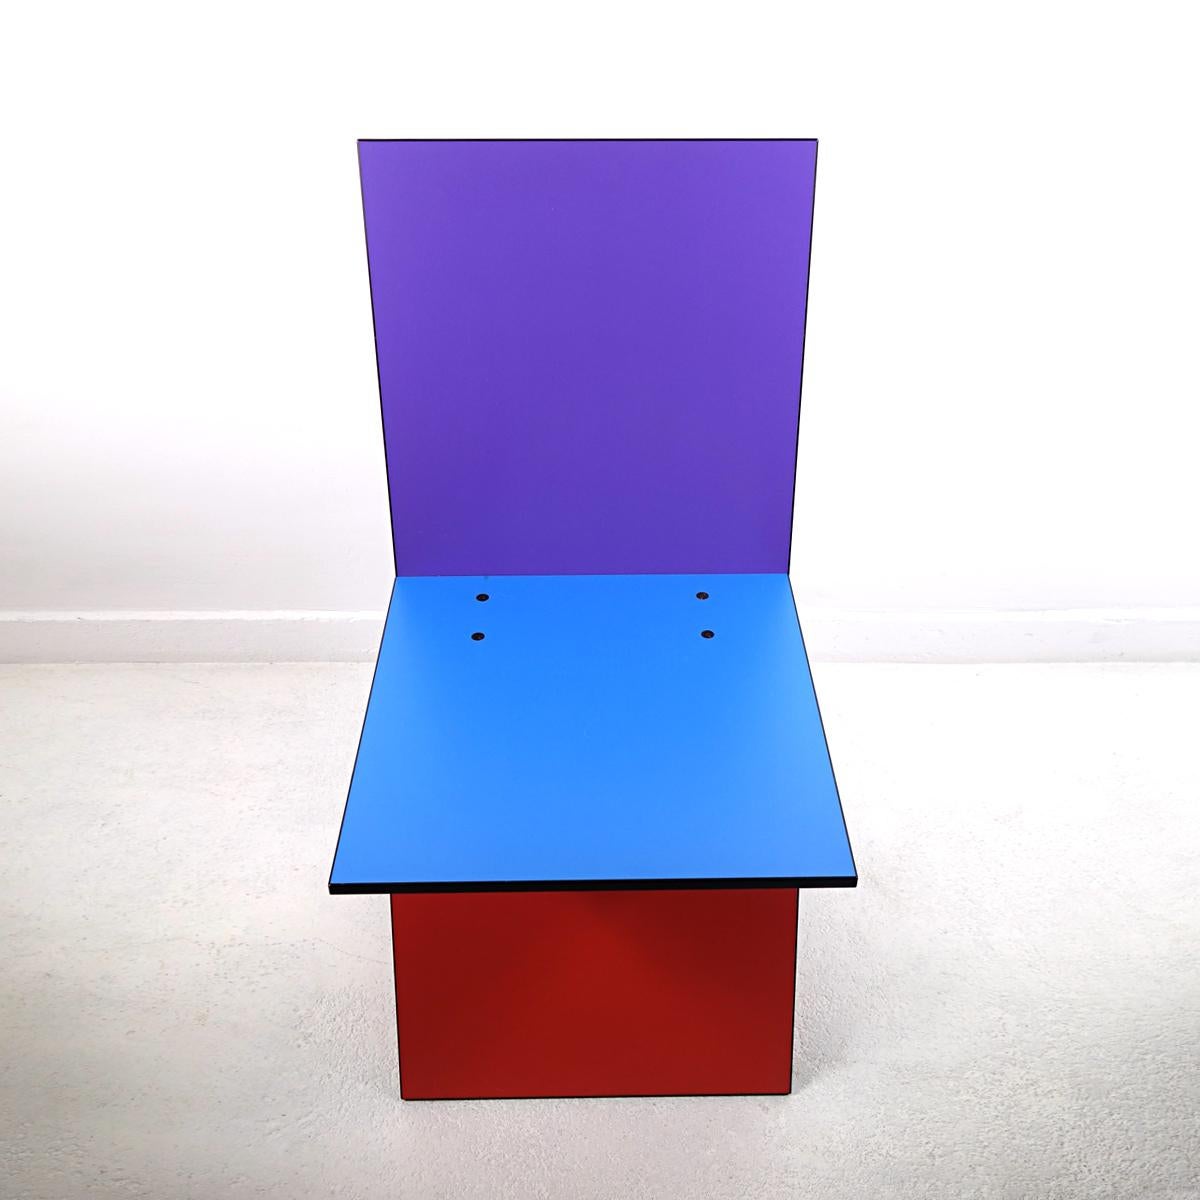 Set of two rare Vilbert chairs designed in 1993 by Verner Panton for Ikea. Only about 4,000 of these chairs were manufactured.

The chairs consist of four multicolored MDF boards screwed together.

Marked 'Verner Panton for Ikea'.